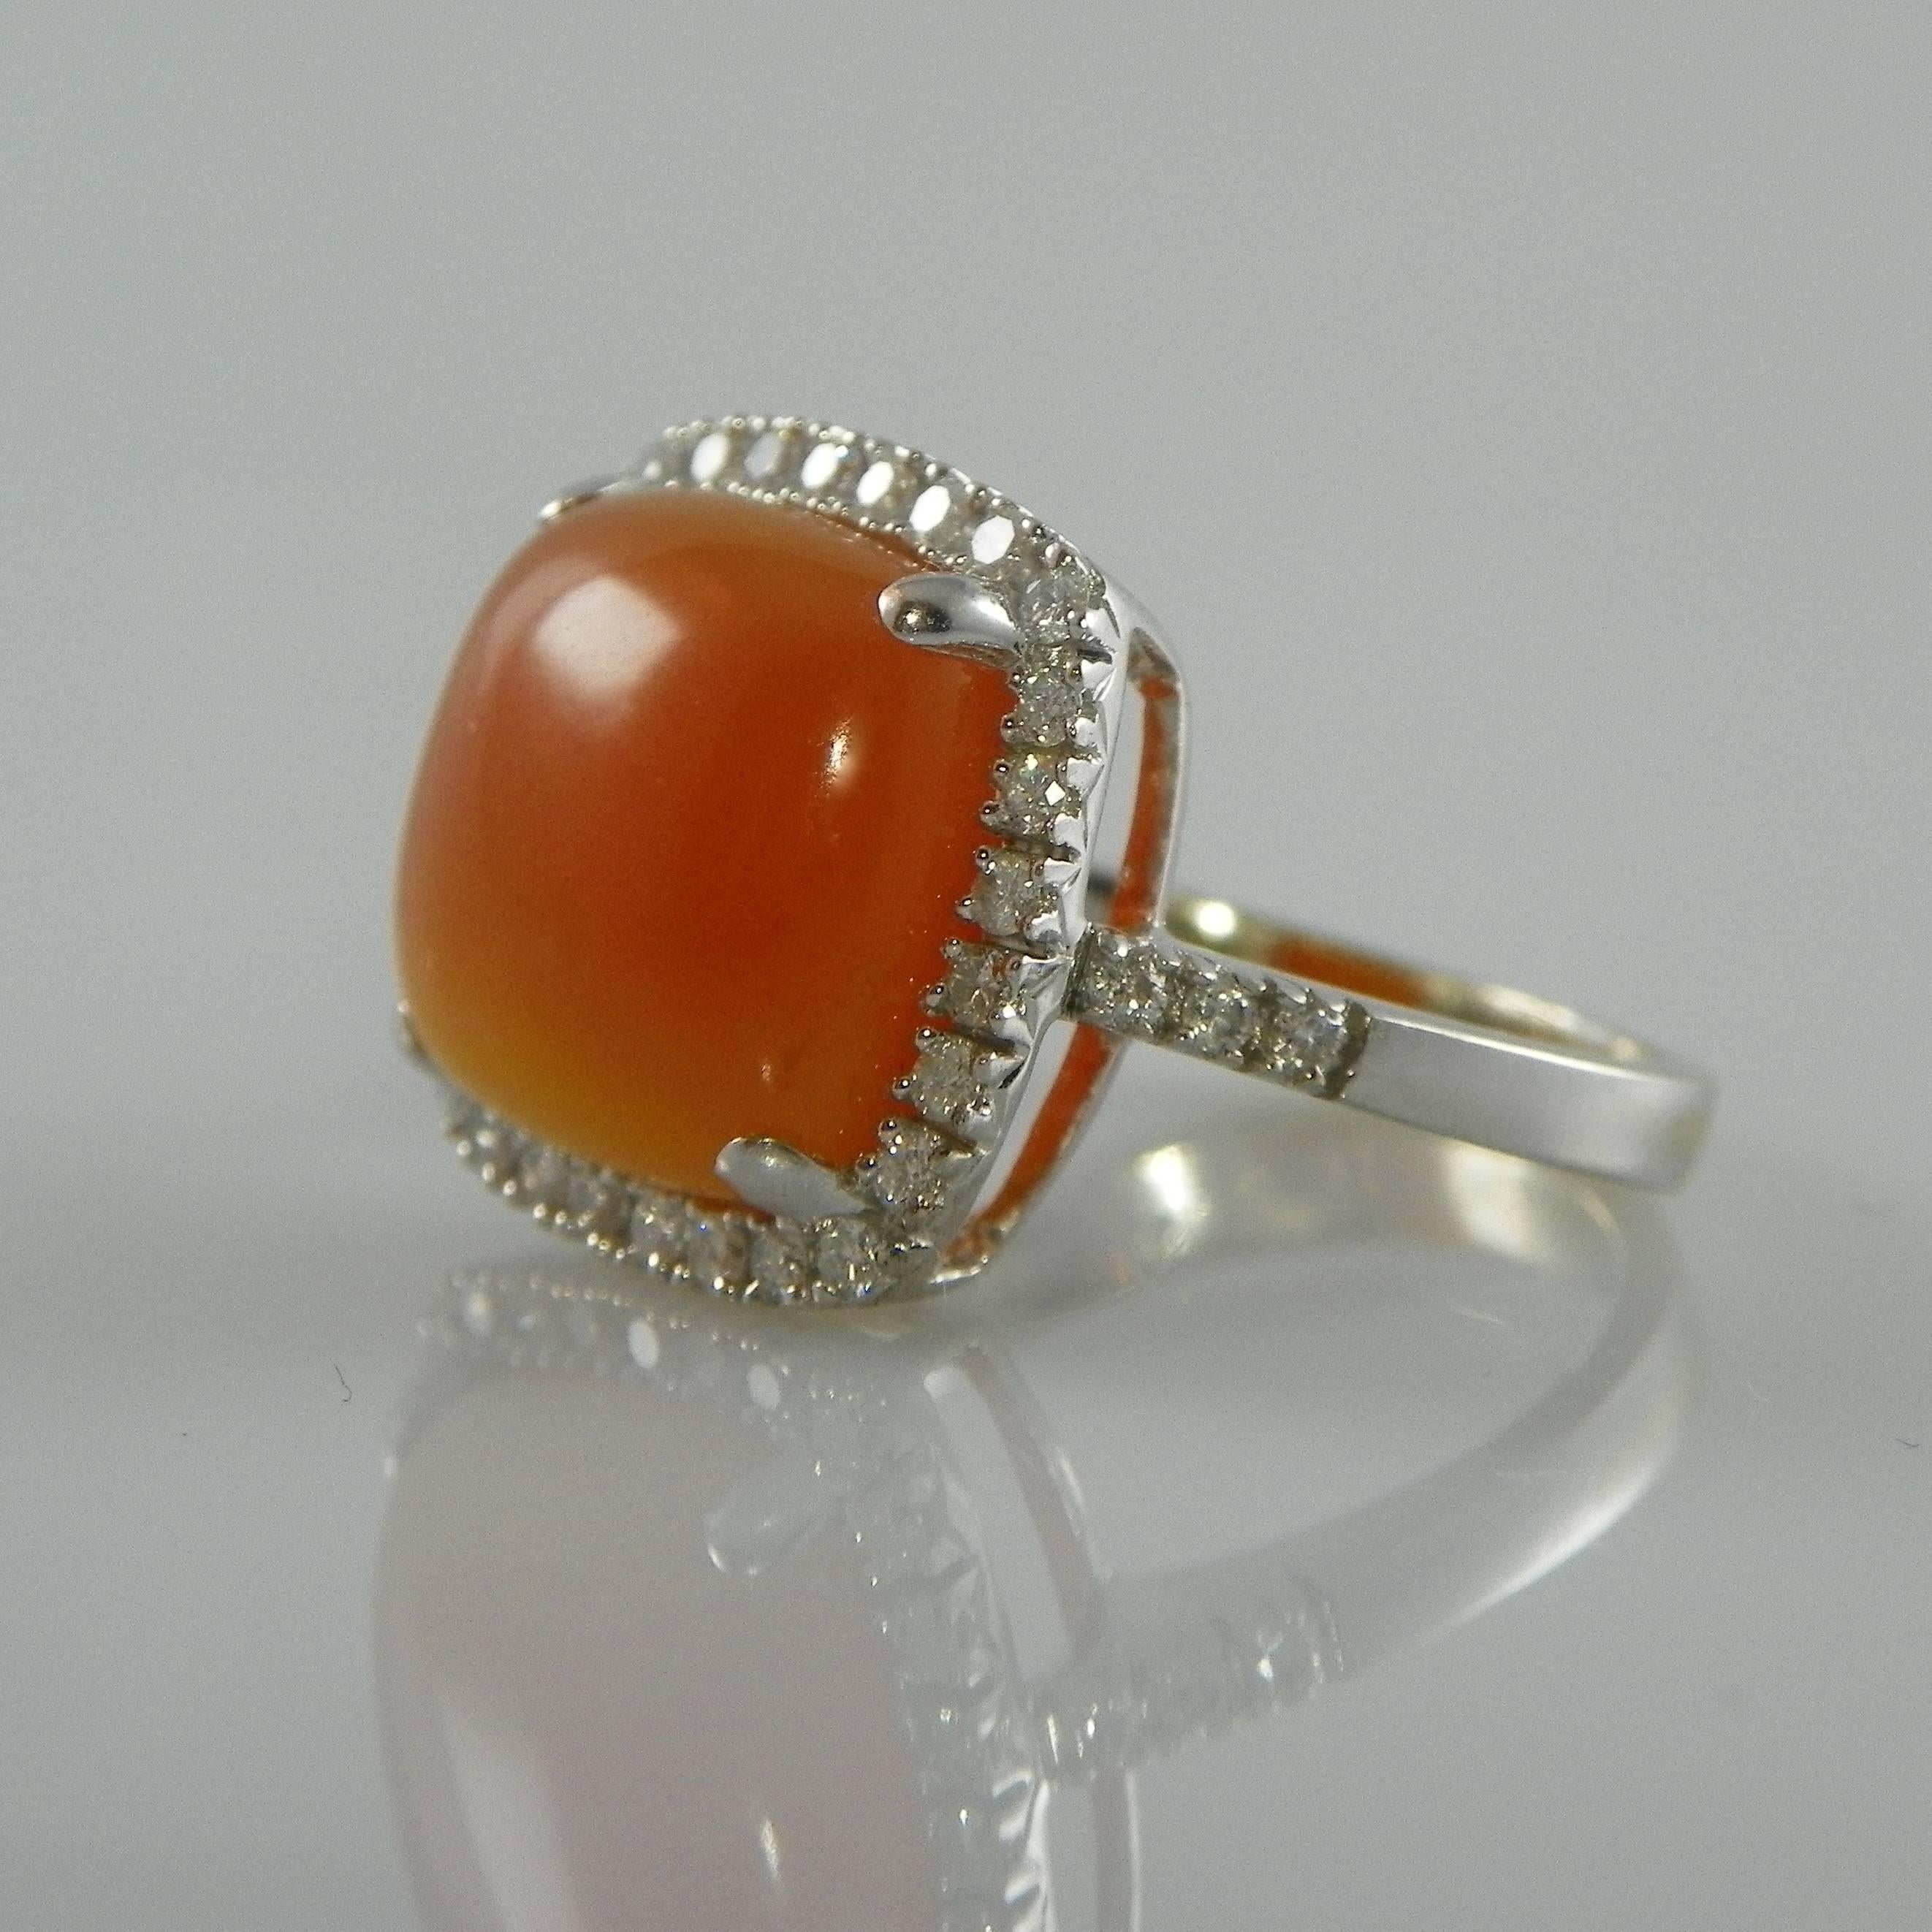 Lovely 14K White Gold Entourage ring with a square orange Chalcedony in a warm color. The stone is set with 34 brilliant cut white diamonds SI quality, in total 0.60 ct. 
Size chalcedony 13mm . Ringsize us 6.75  Eu 54    resizable to most finger